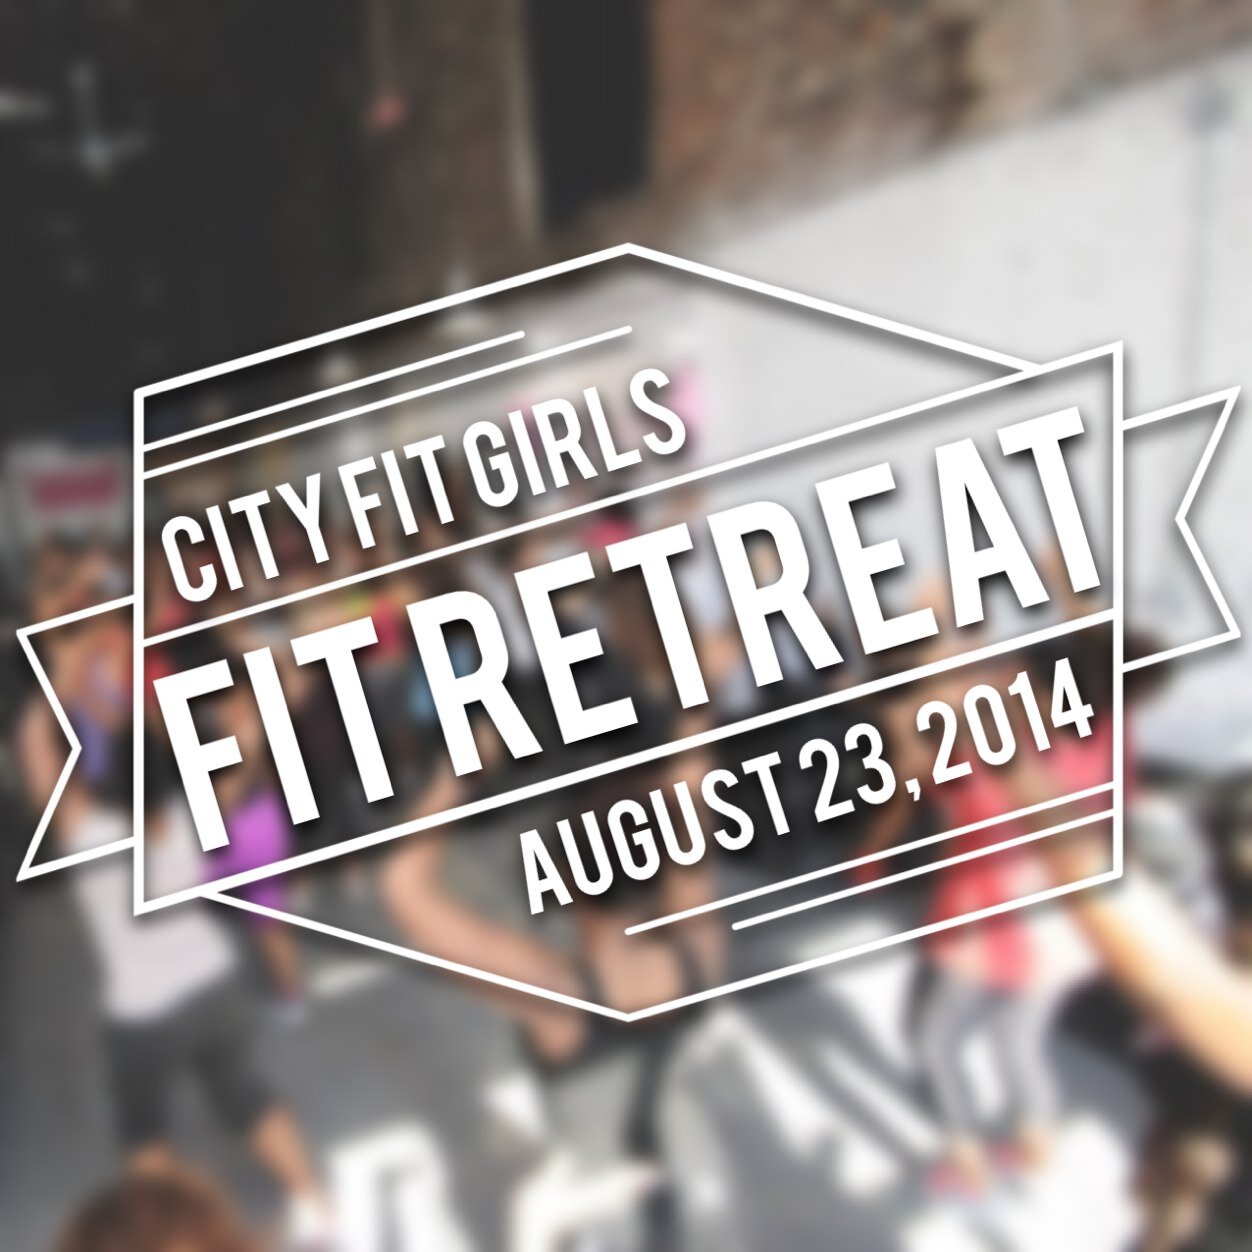 Get Fit & Healthy at City Fit Girls FitRetreat on 8/23